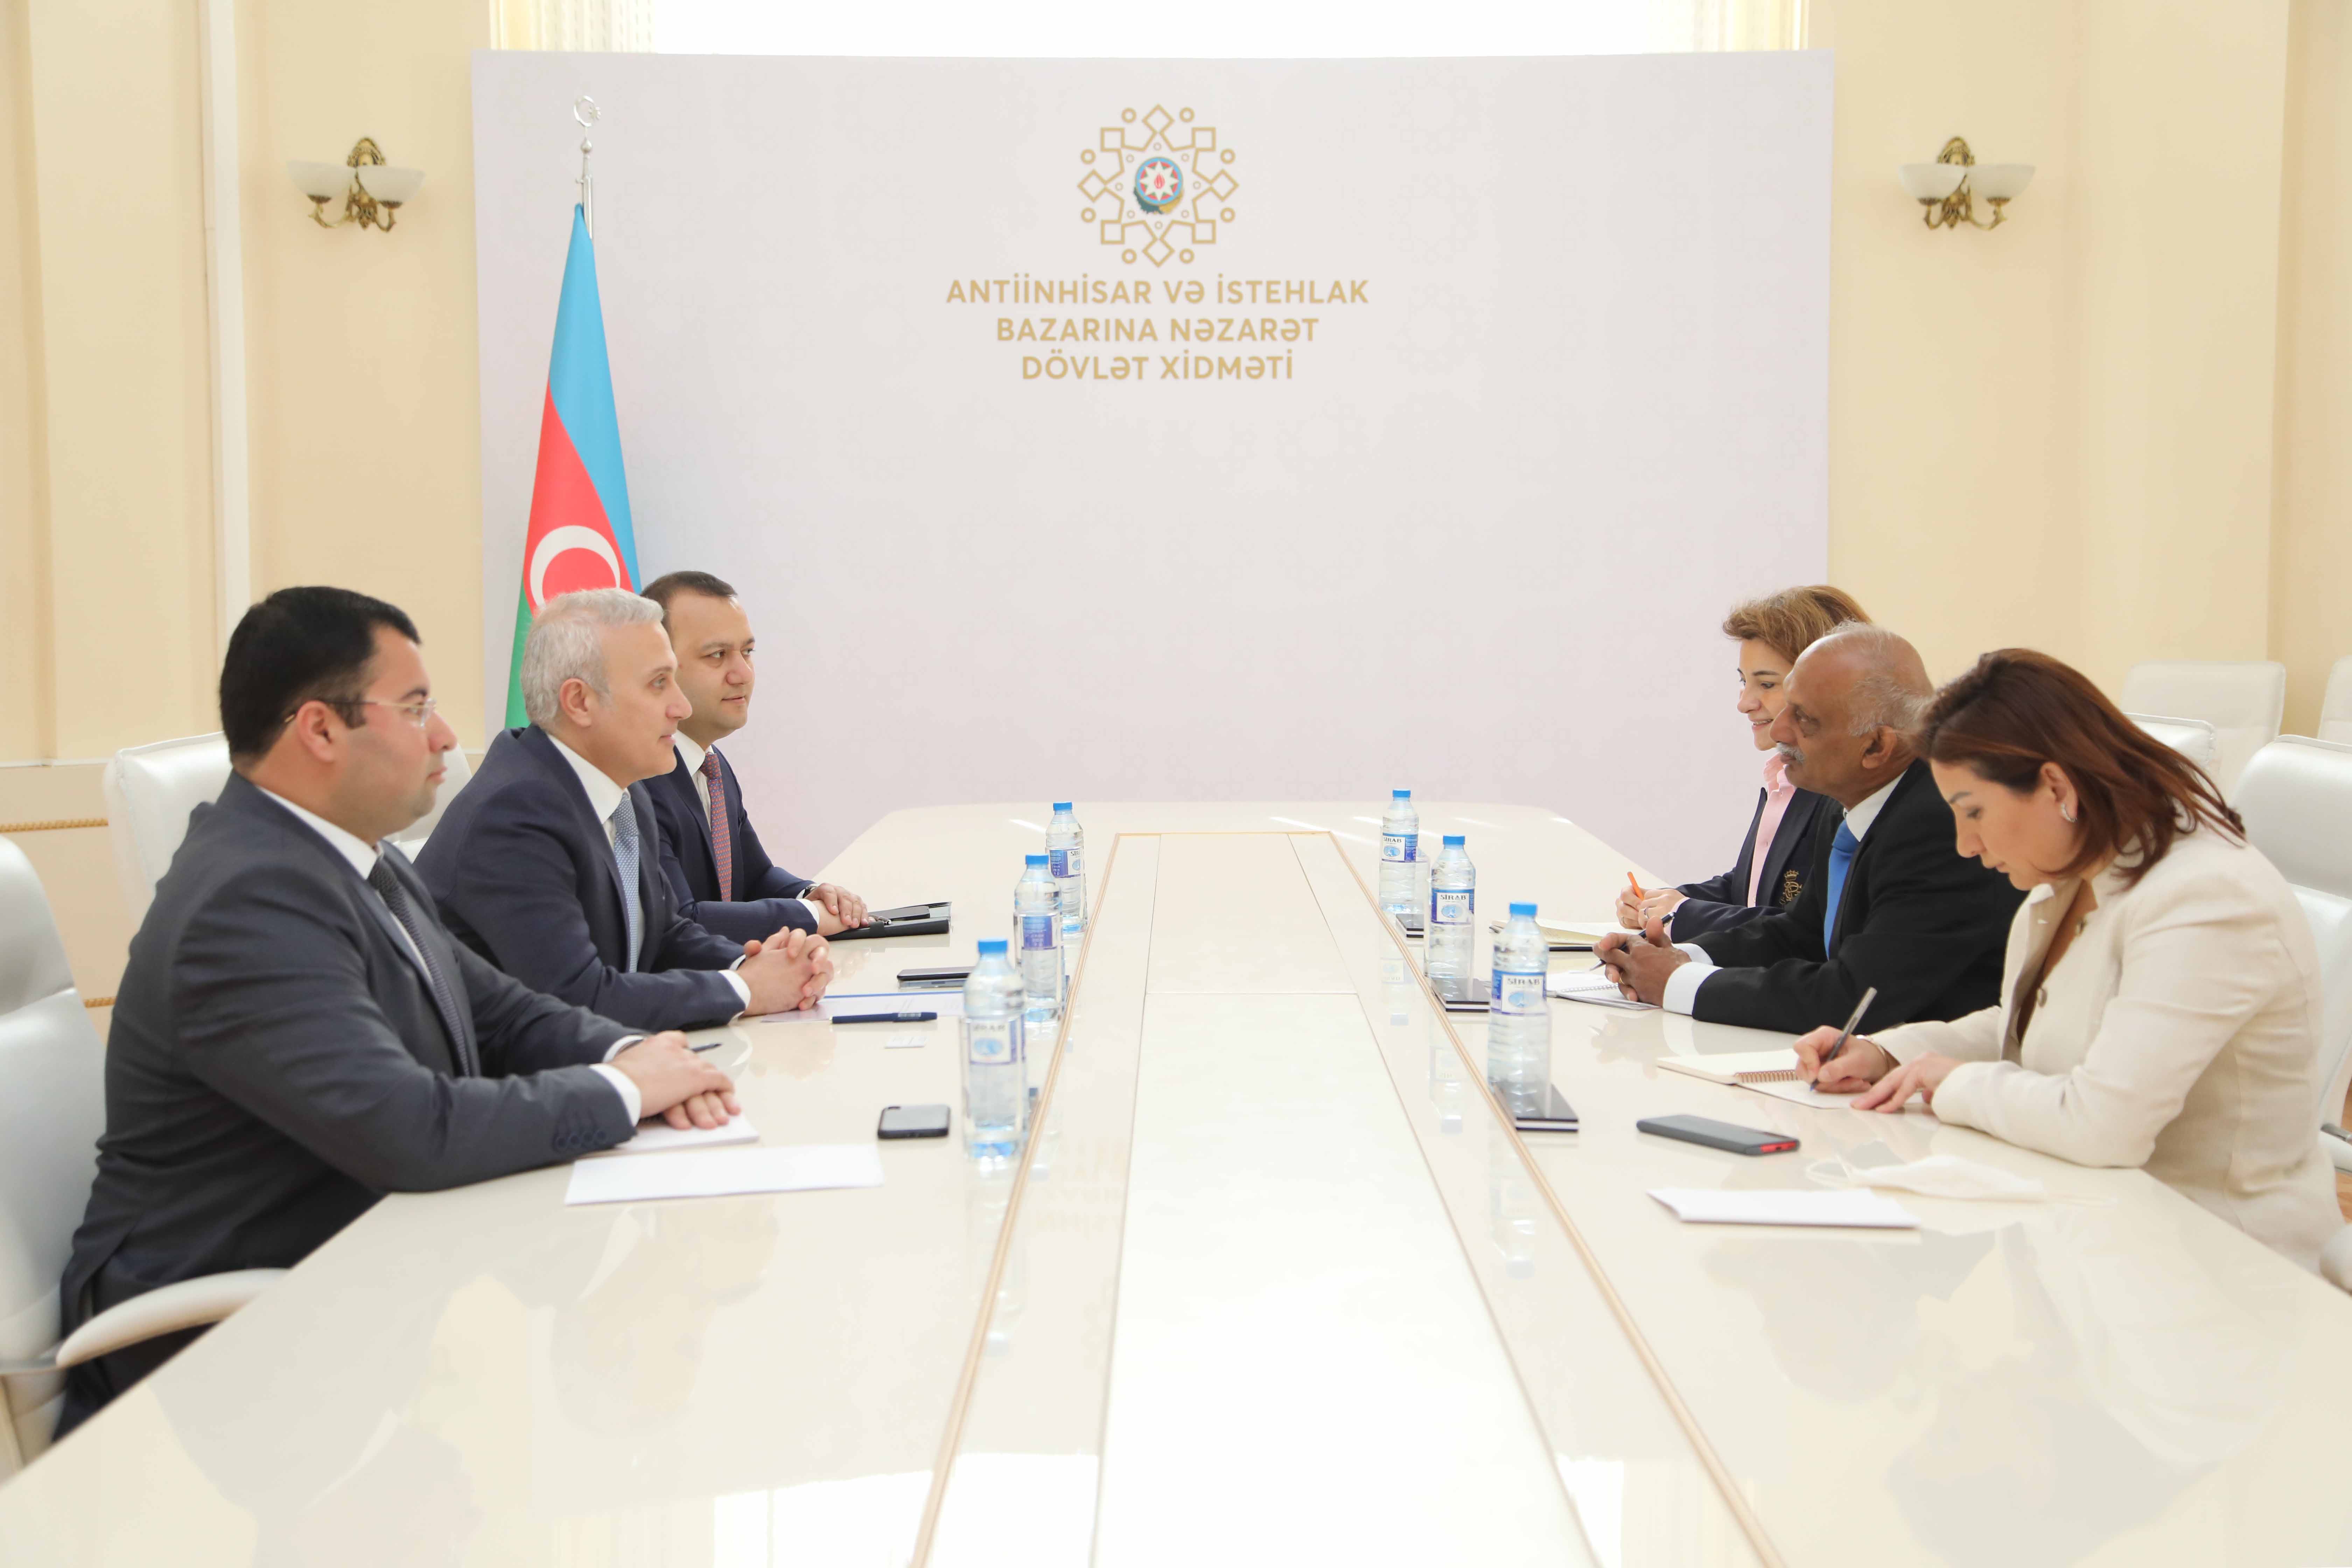 Relations between Azerbaijan and Kazakhstan are expanding in the field of standardization